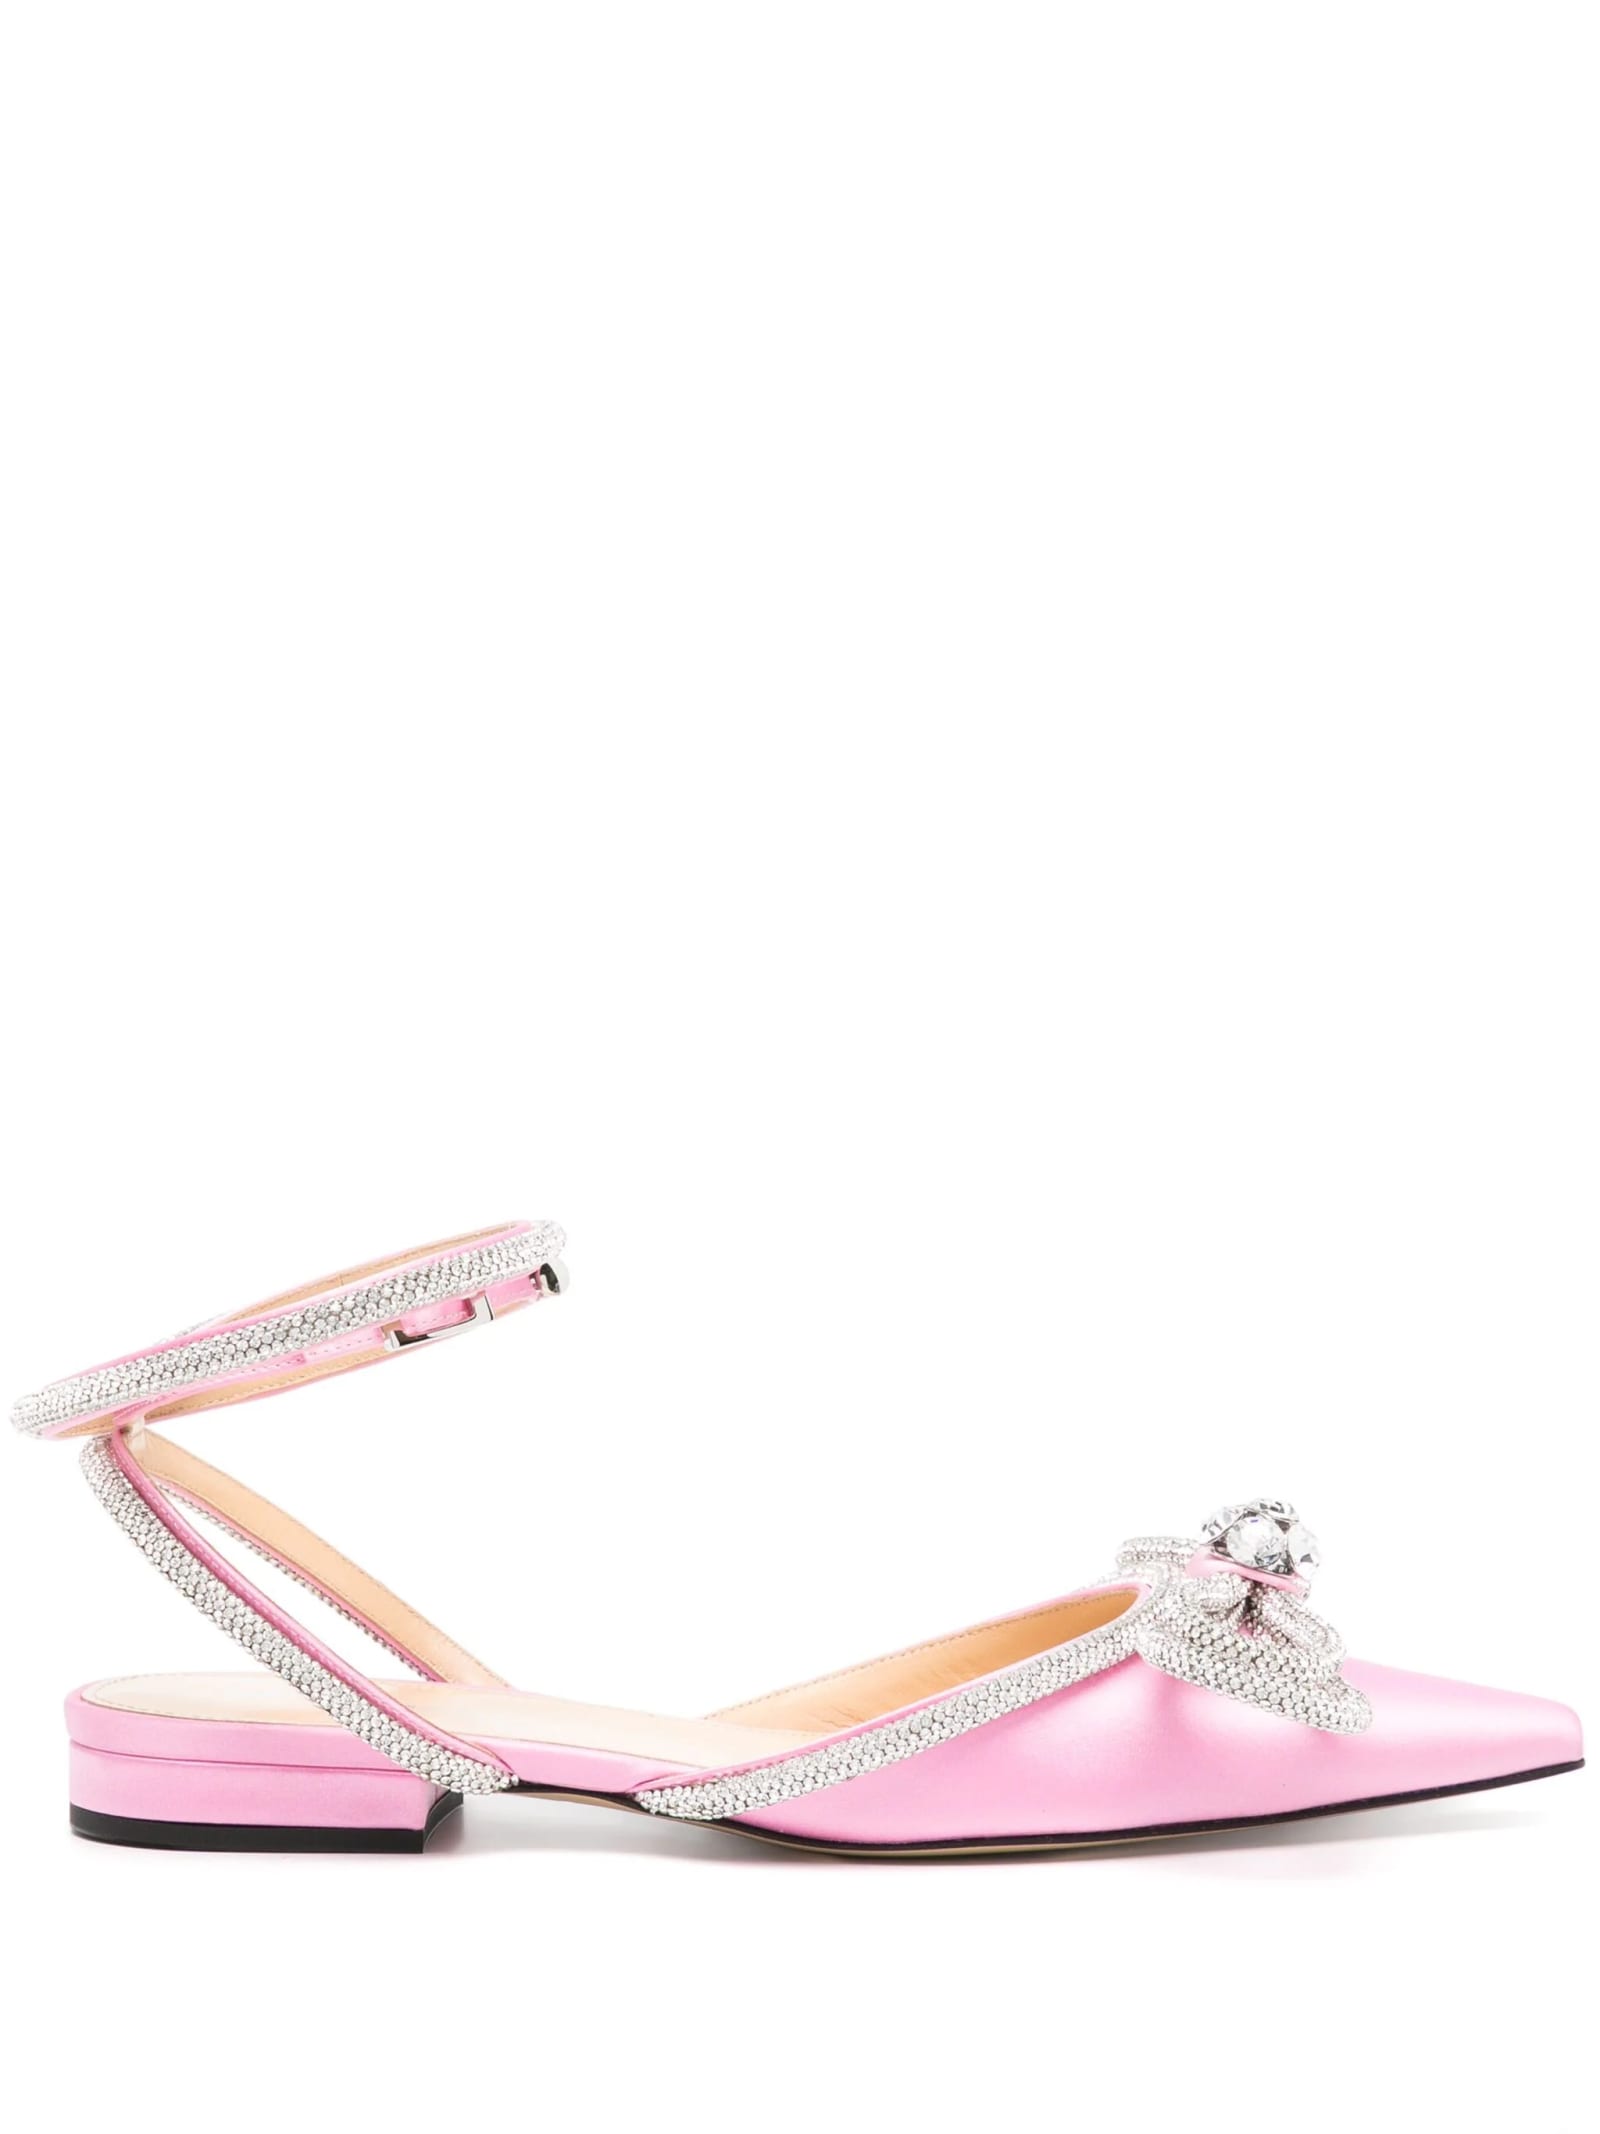 Pink Patent Double Bow Ballerinas